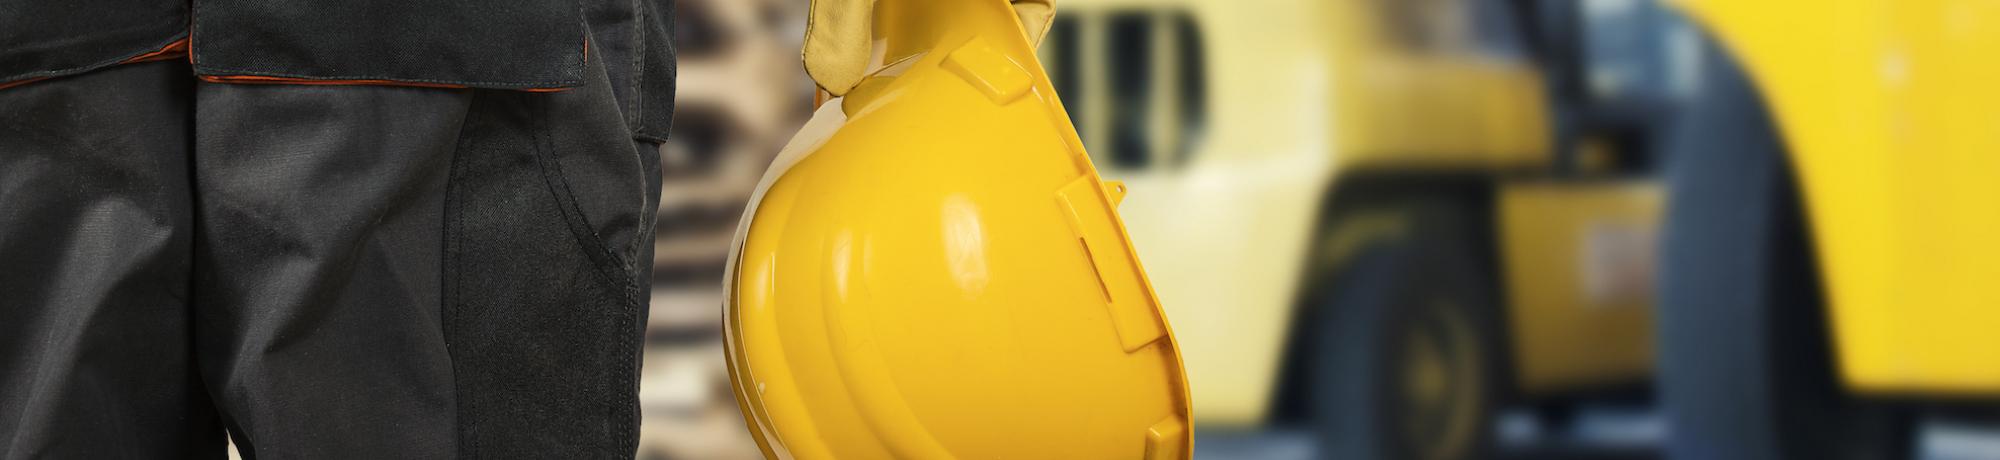 person holding a hard hat at a job site